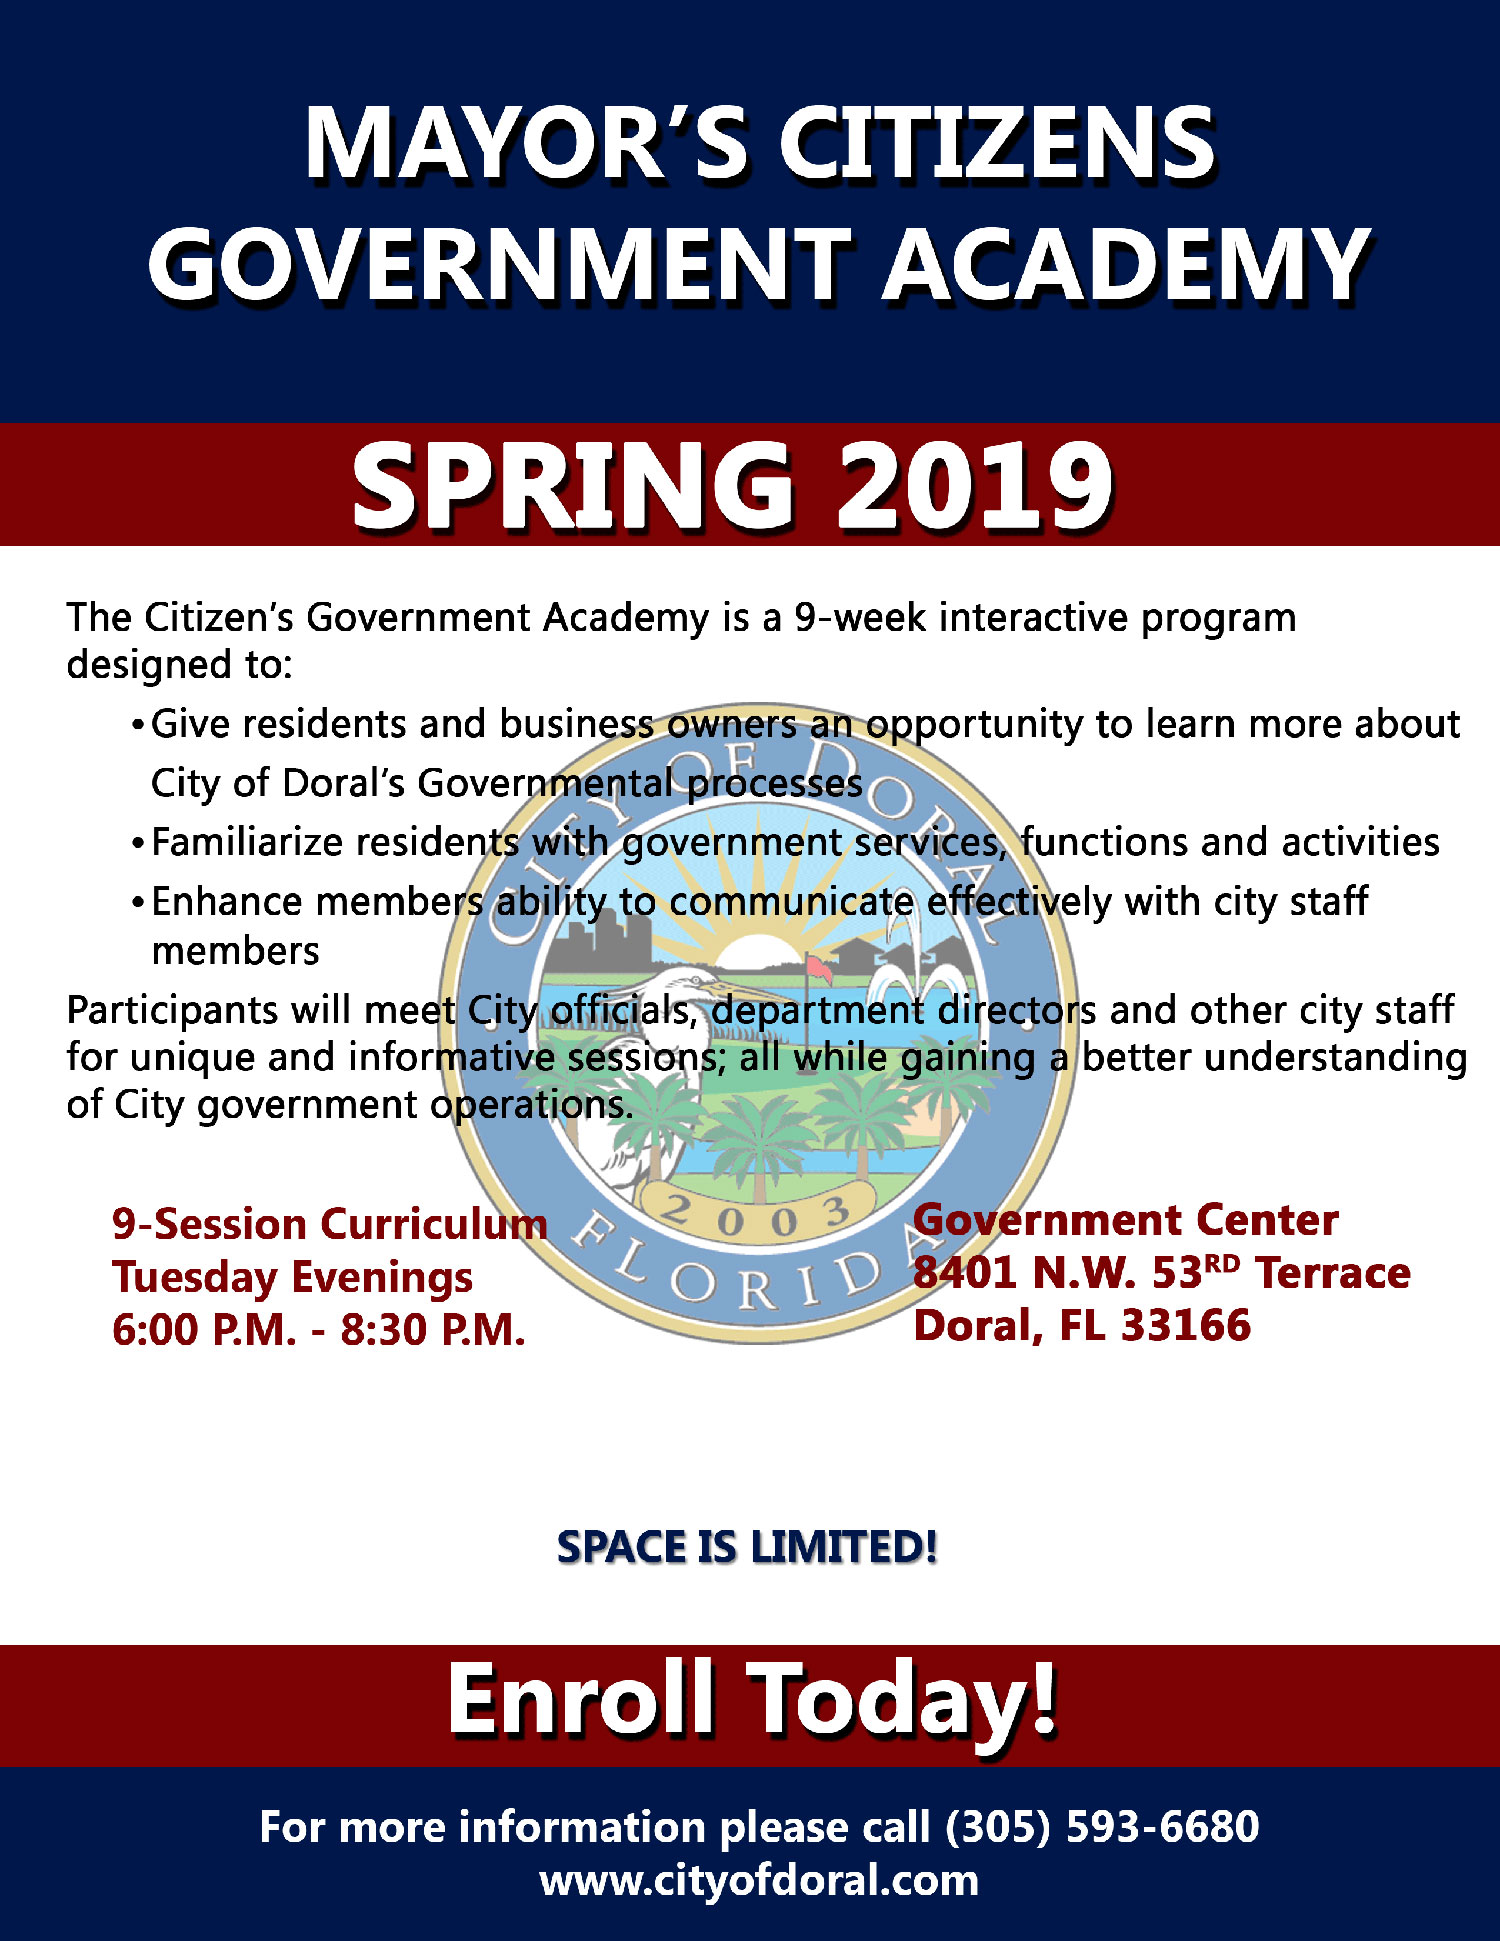 Mayor's Government Citizens Academy